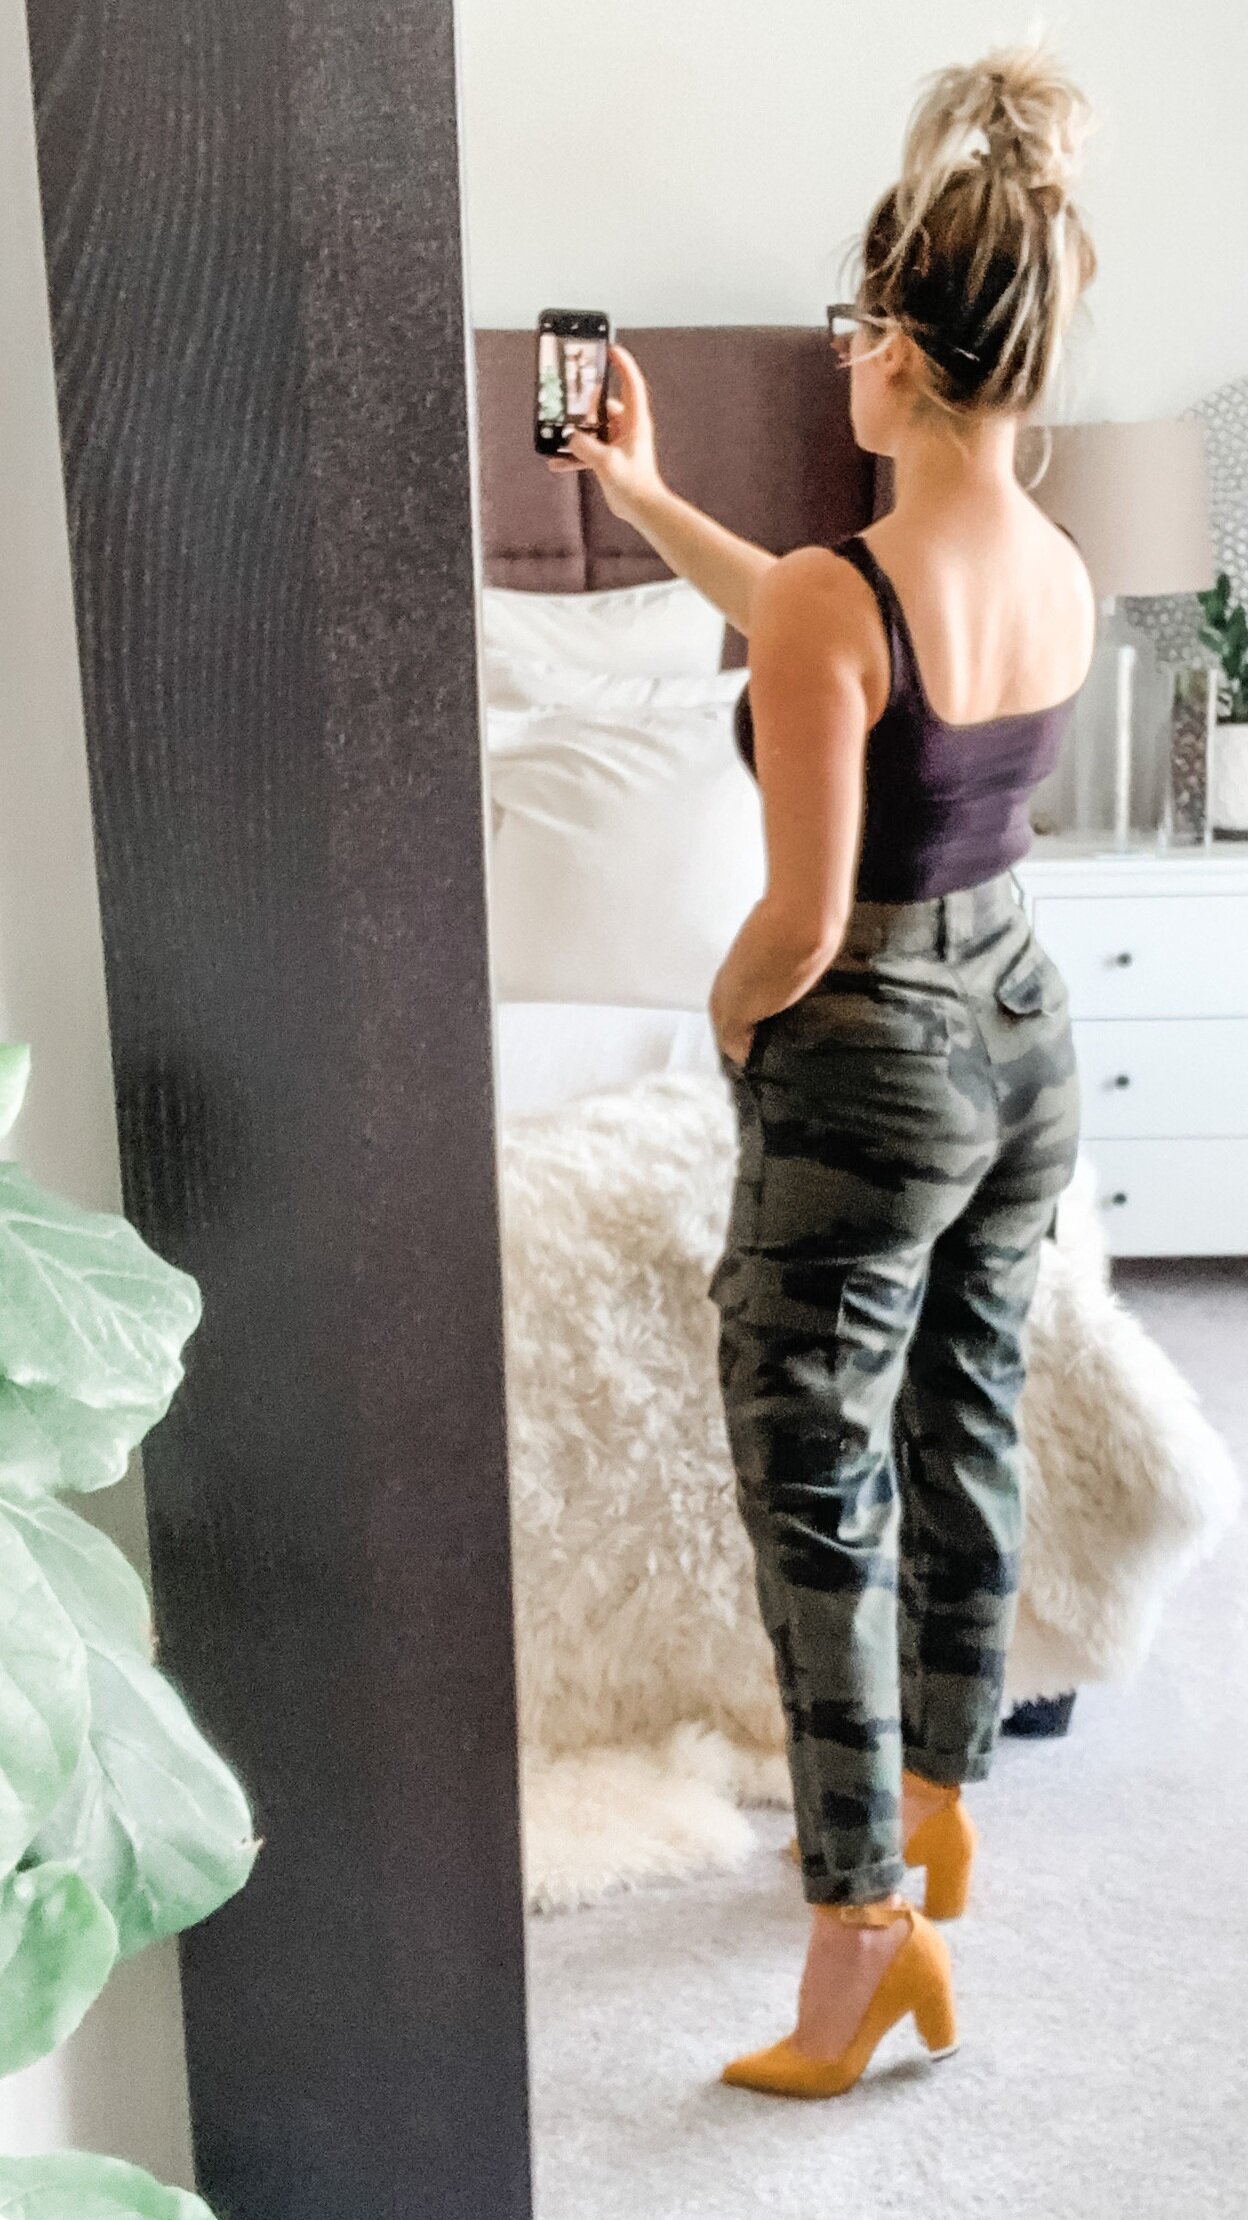 BACKSIDE STYLING TIPS WHEN BUYING HIGH-WAIST PANTS